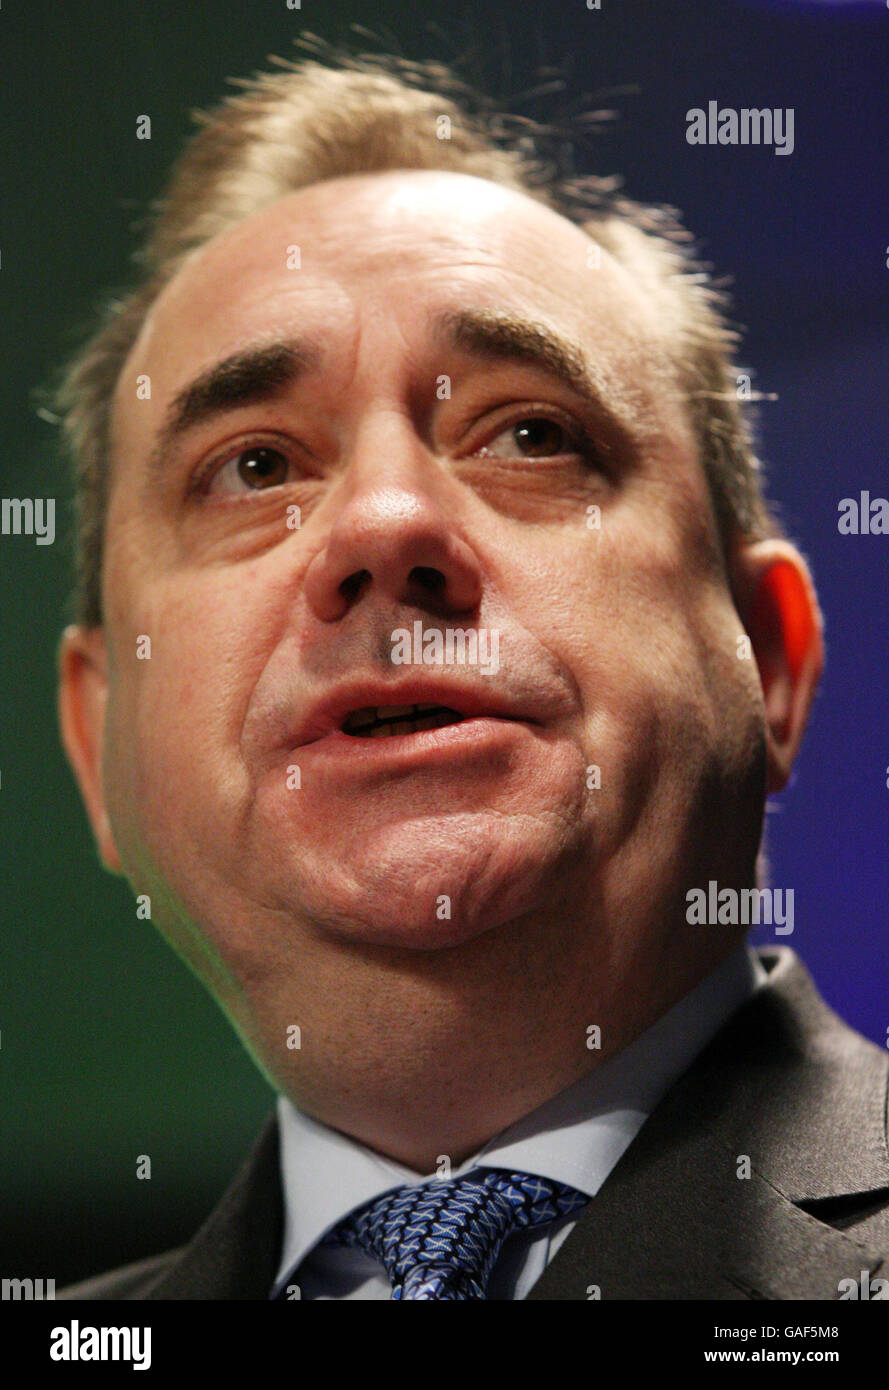 Scottish First minister Alex Salmond speaks at a press conference at St Andrews House, Edinburgh. Stock Photo